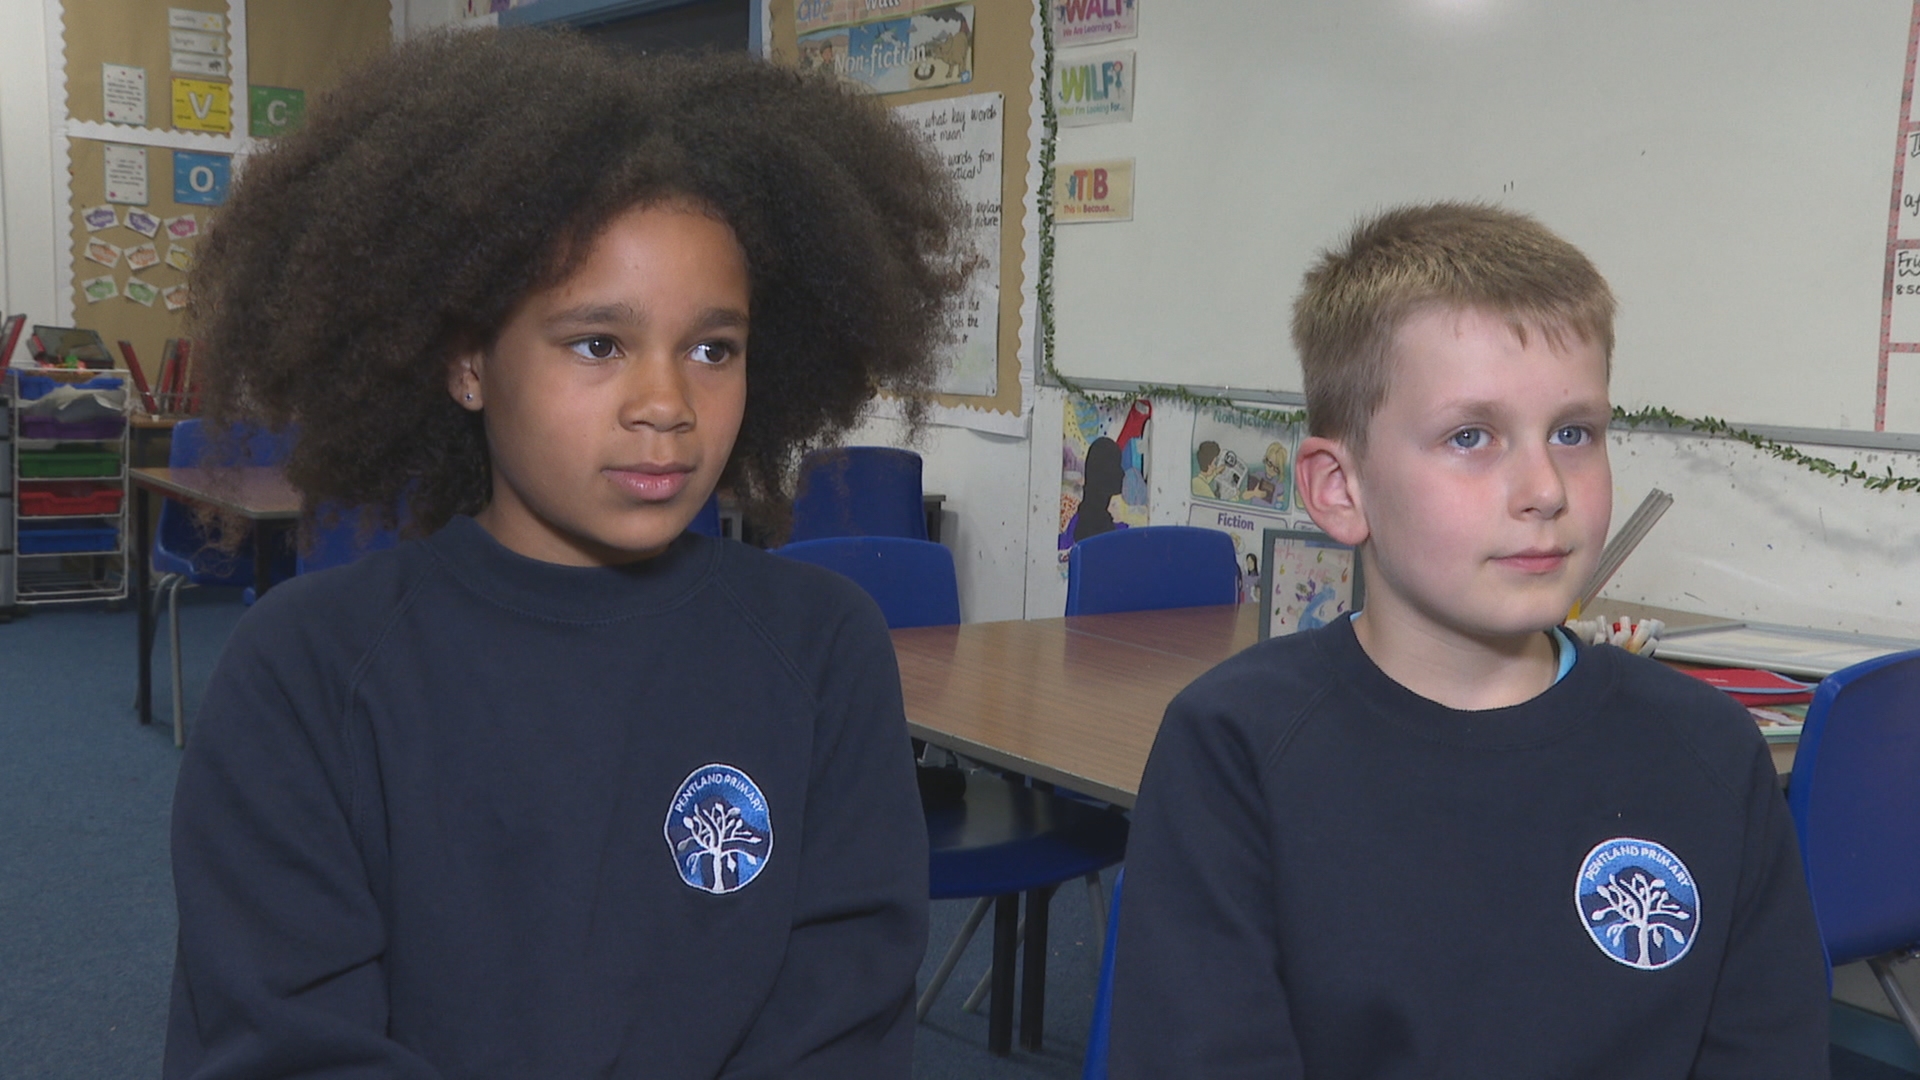 Eva (left) and Murray (right), who thought his teacher was kidding about receiving the letter.